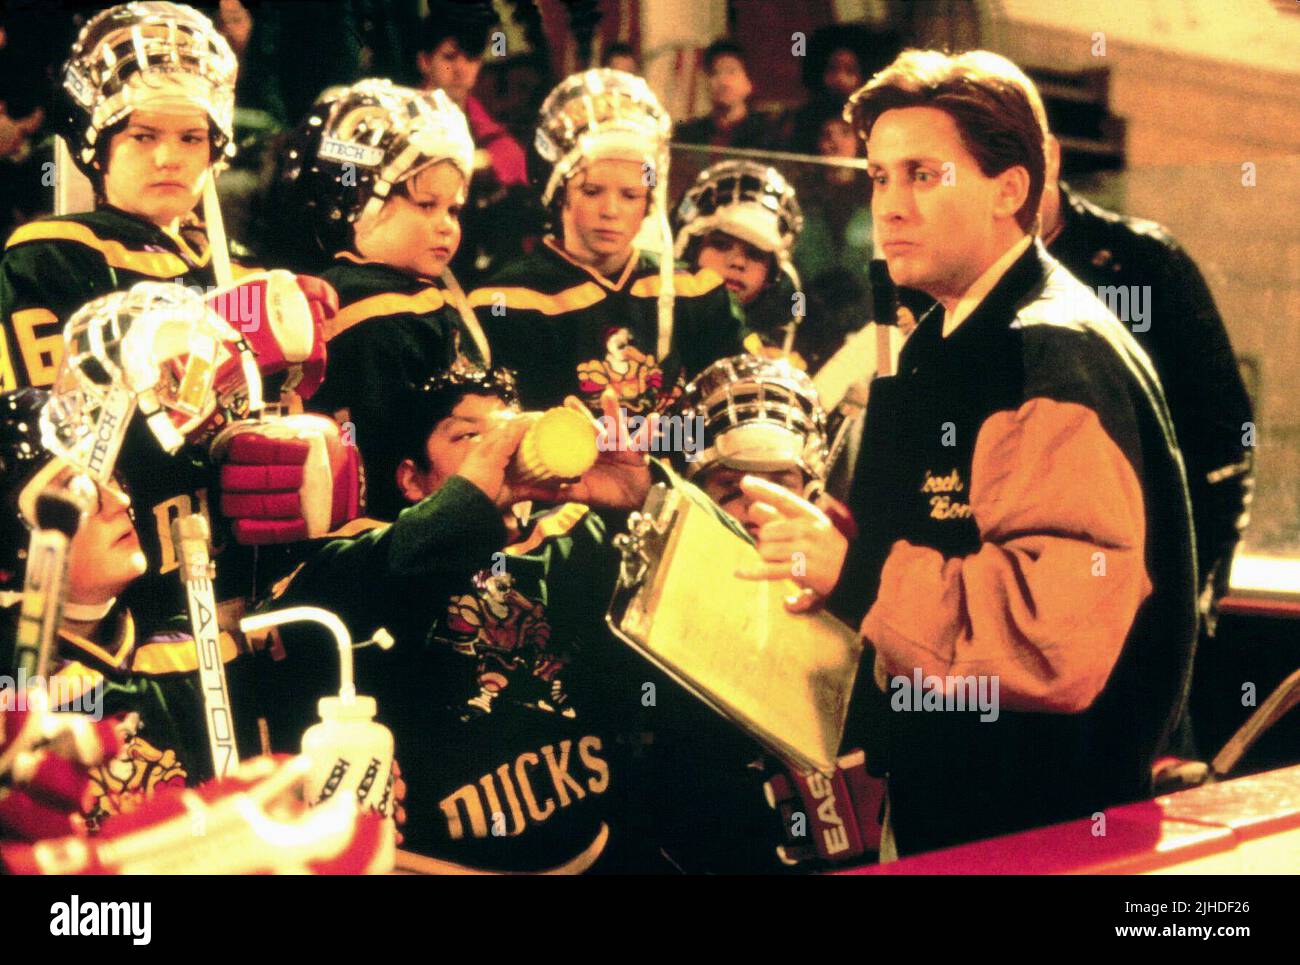 The Mighty Ducks Photos, News, Videos and Gallery, Just Jared Jr.